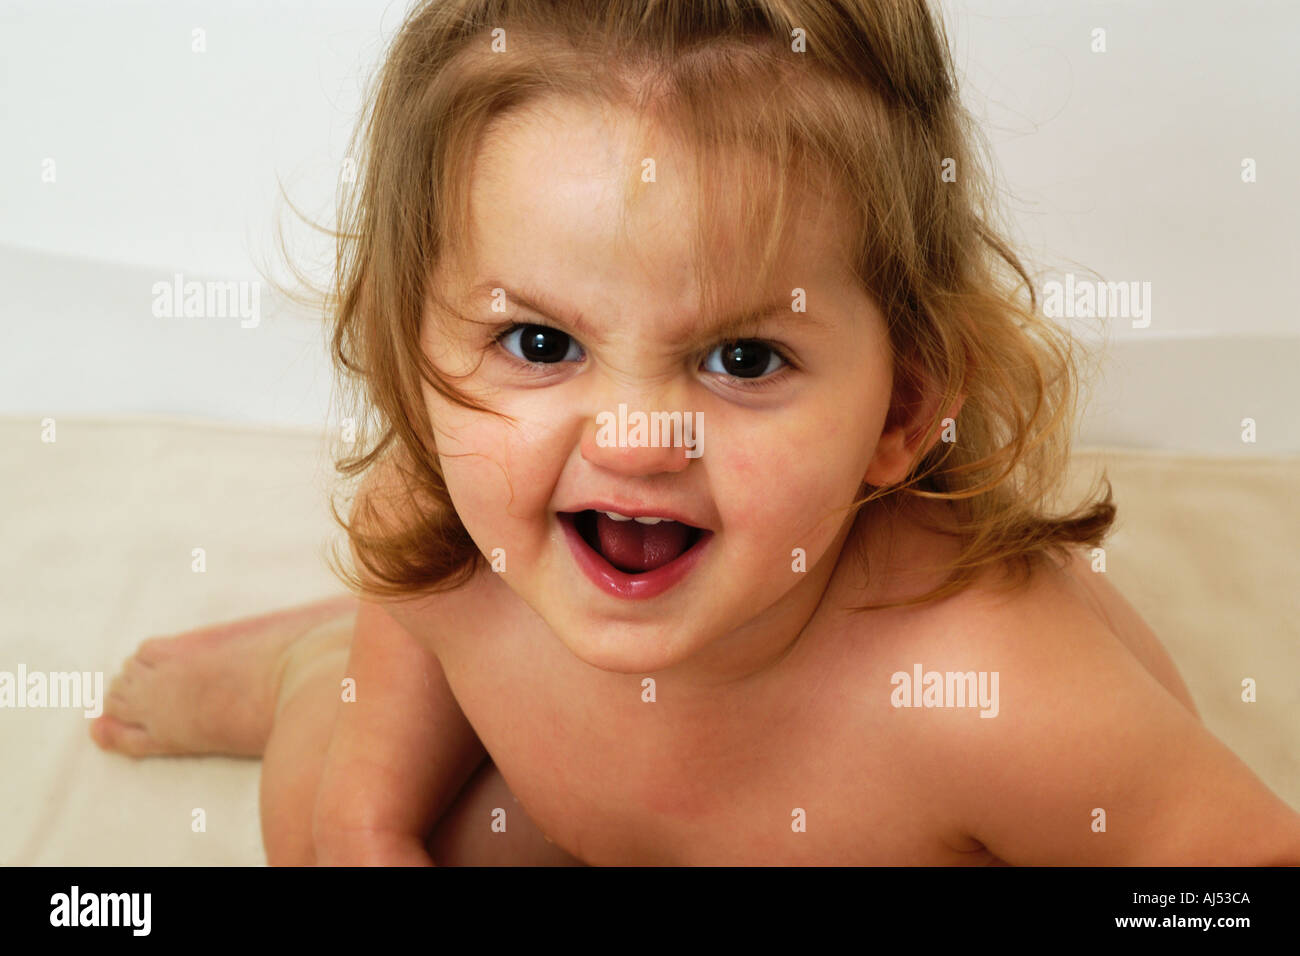 portrait of a young baby looking agressively at camera for joking Stock Photo